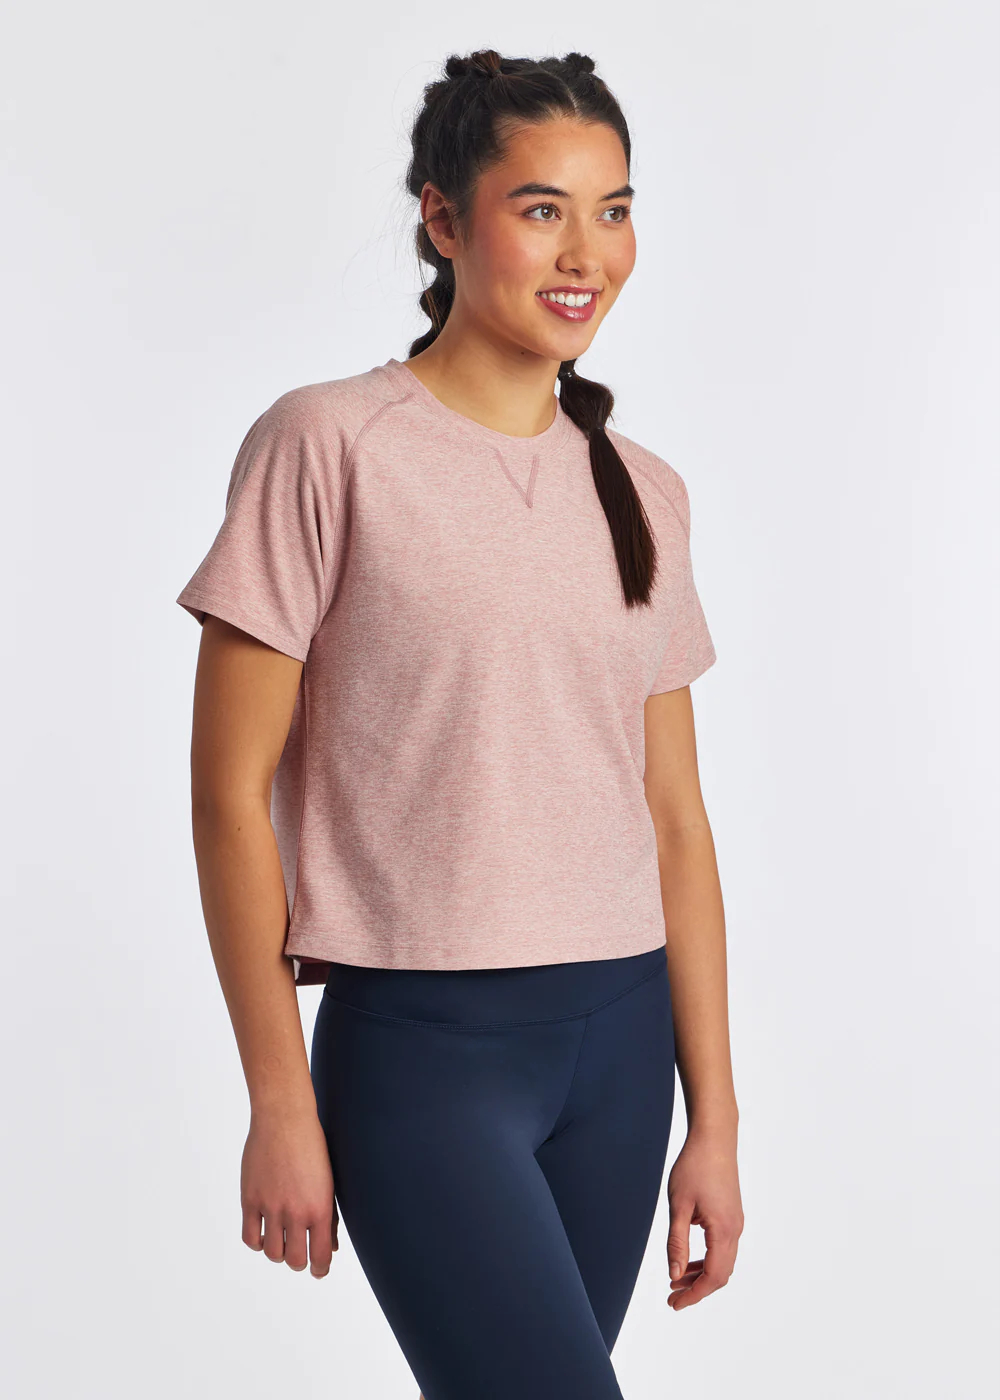 Oiselle Race Day Track Pant - Distance Runwear